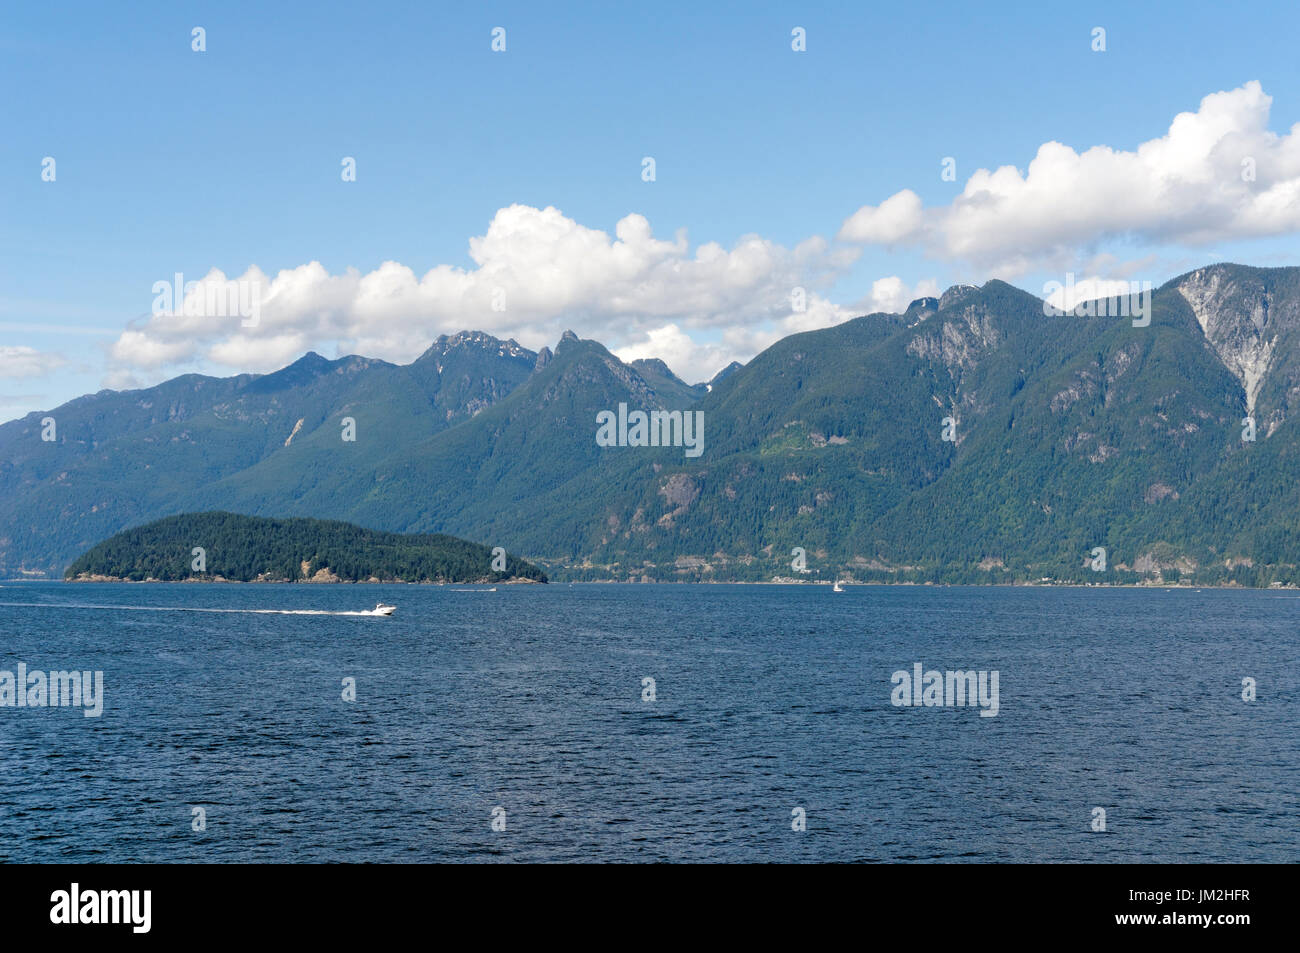 Queen Charlotte Channel and Coast Mountains from the Bowen Island Ferry, British Columbia, Canada Stock Photo